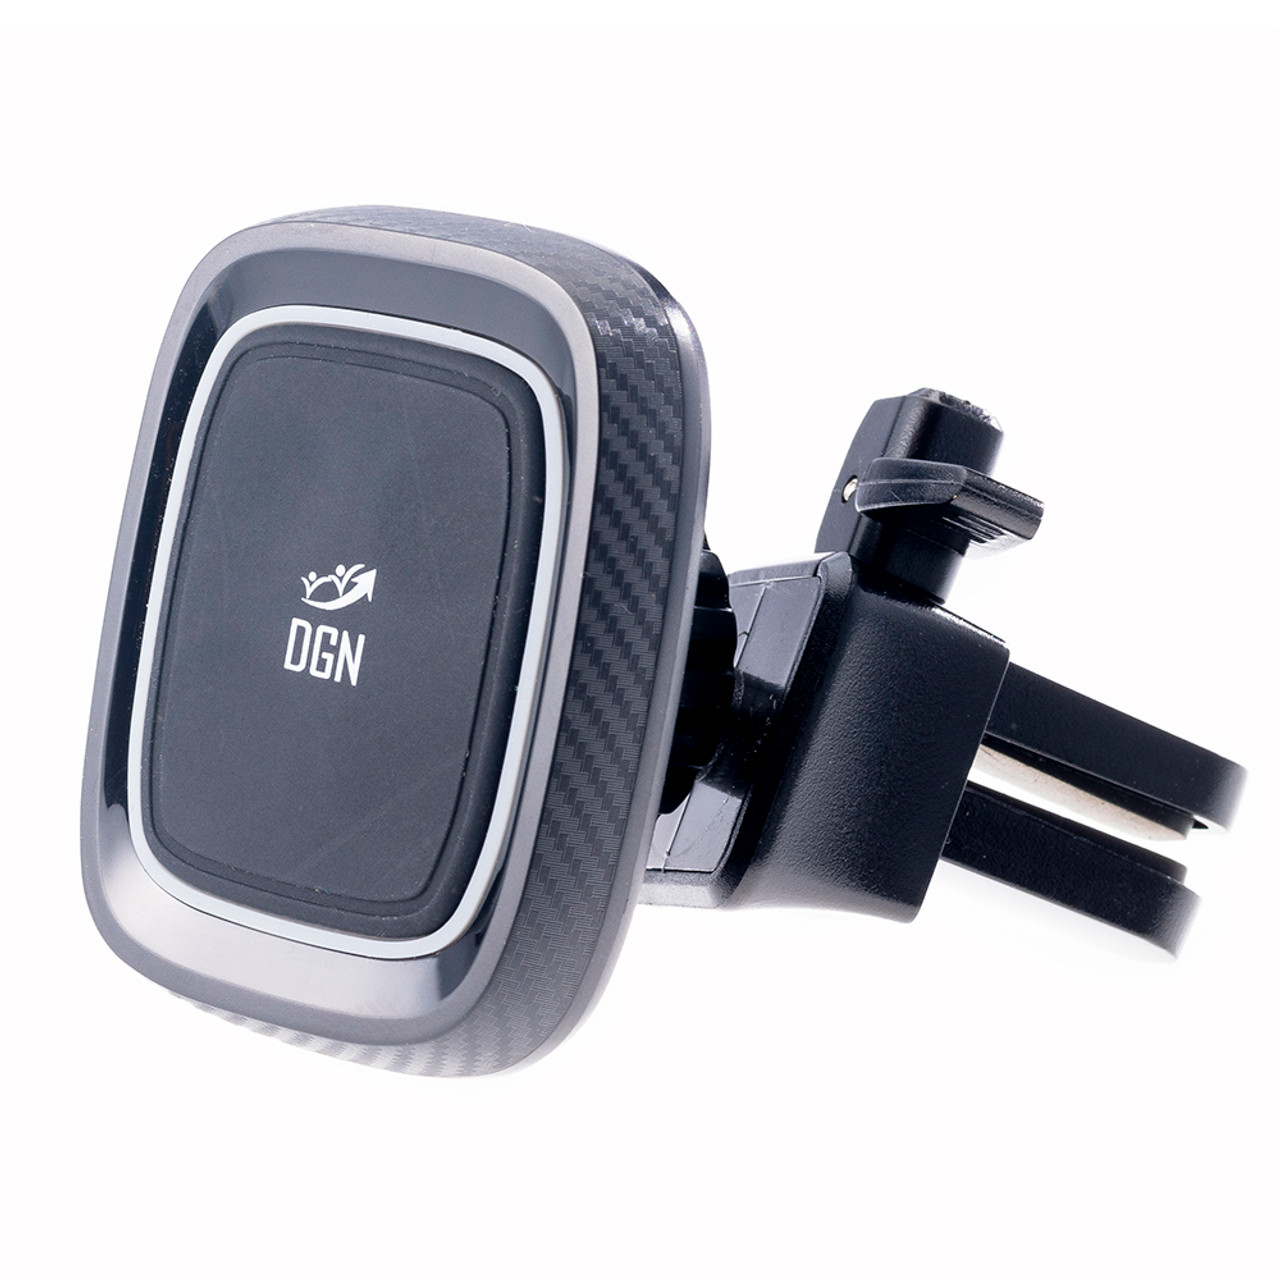 Magnetic Car Air Vent Mount for Smartphones product image